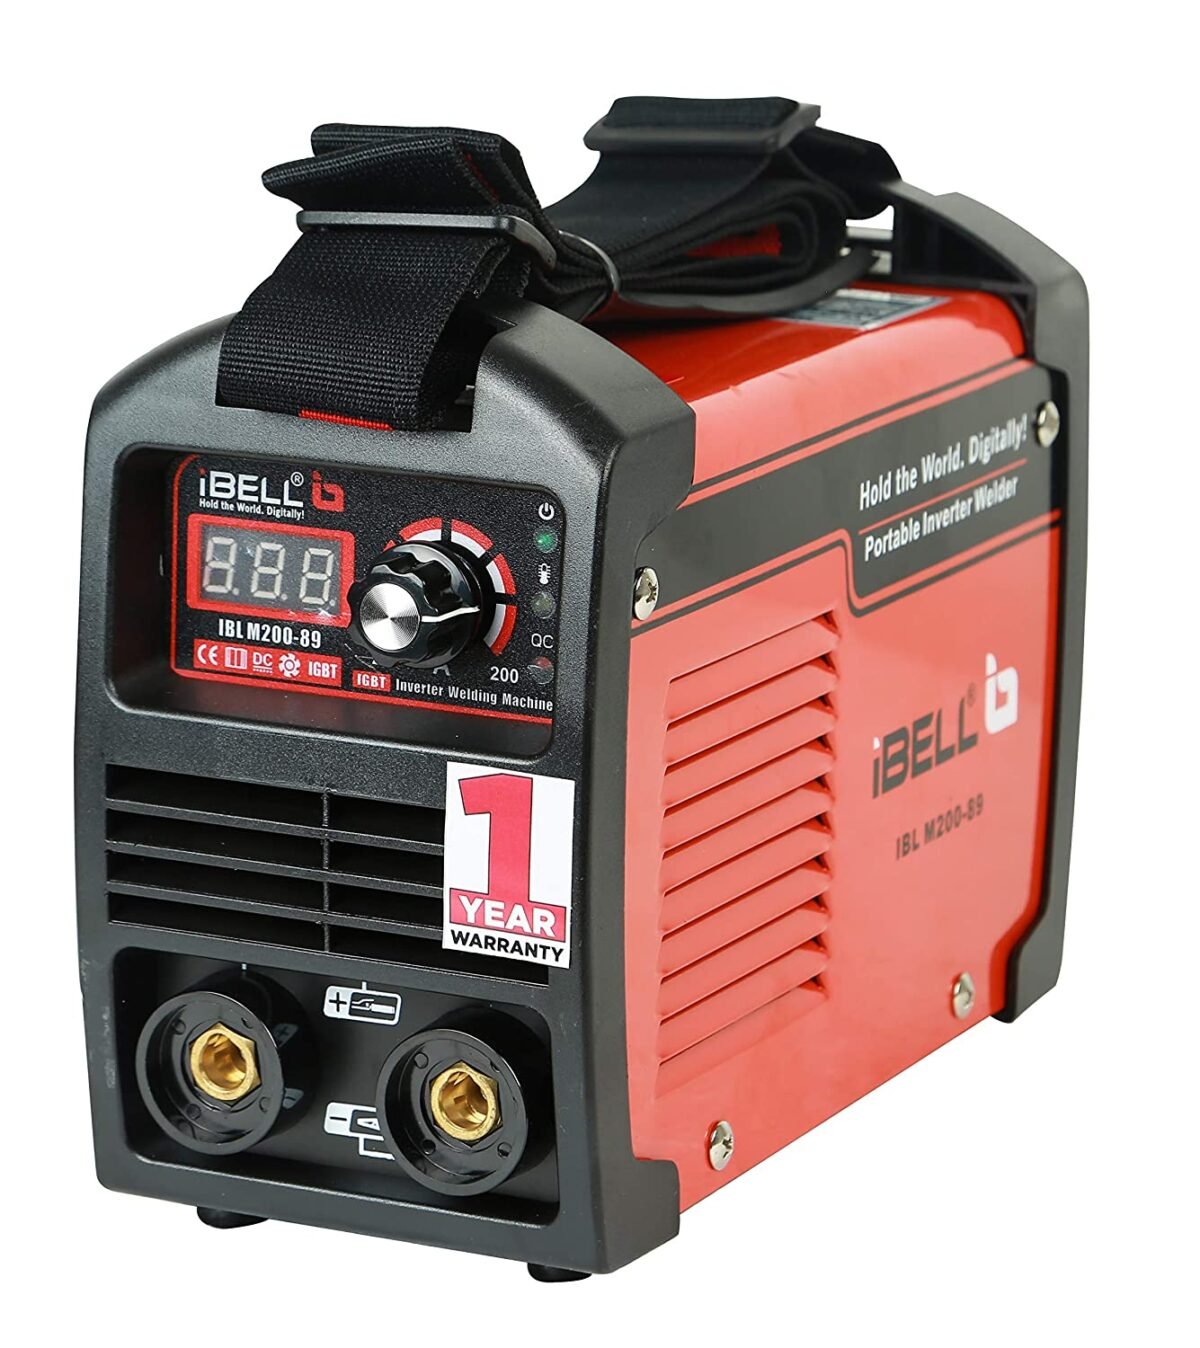 iBELL Inverter ARC Welding Machine (IGBT) 250A with Hot Start,Anti-Stick,Arc Force,Power Boost Functions- 1 Year Warranty